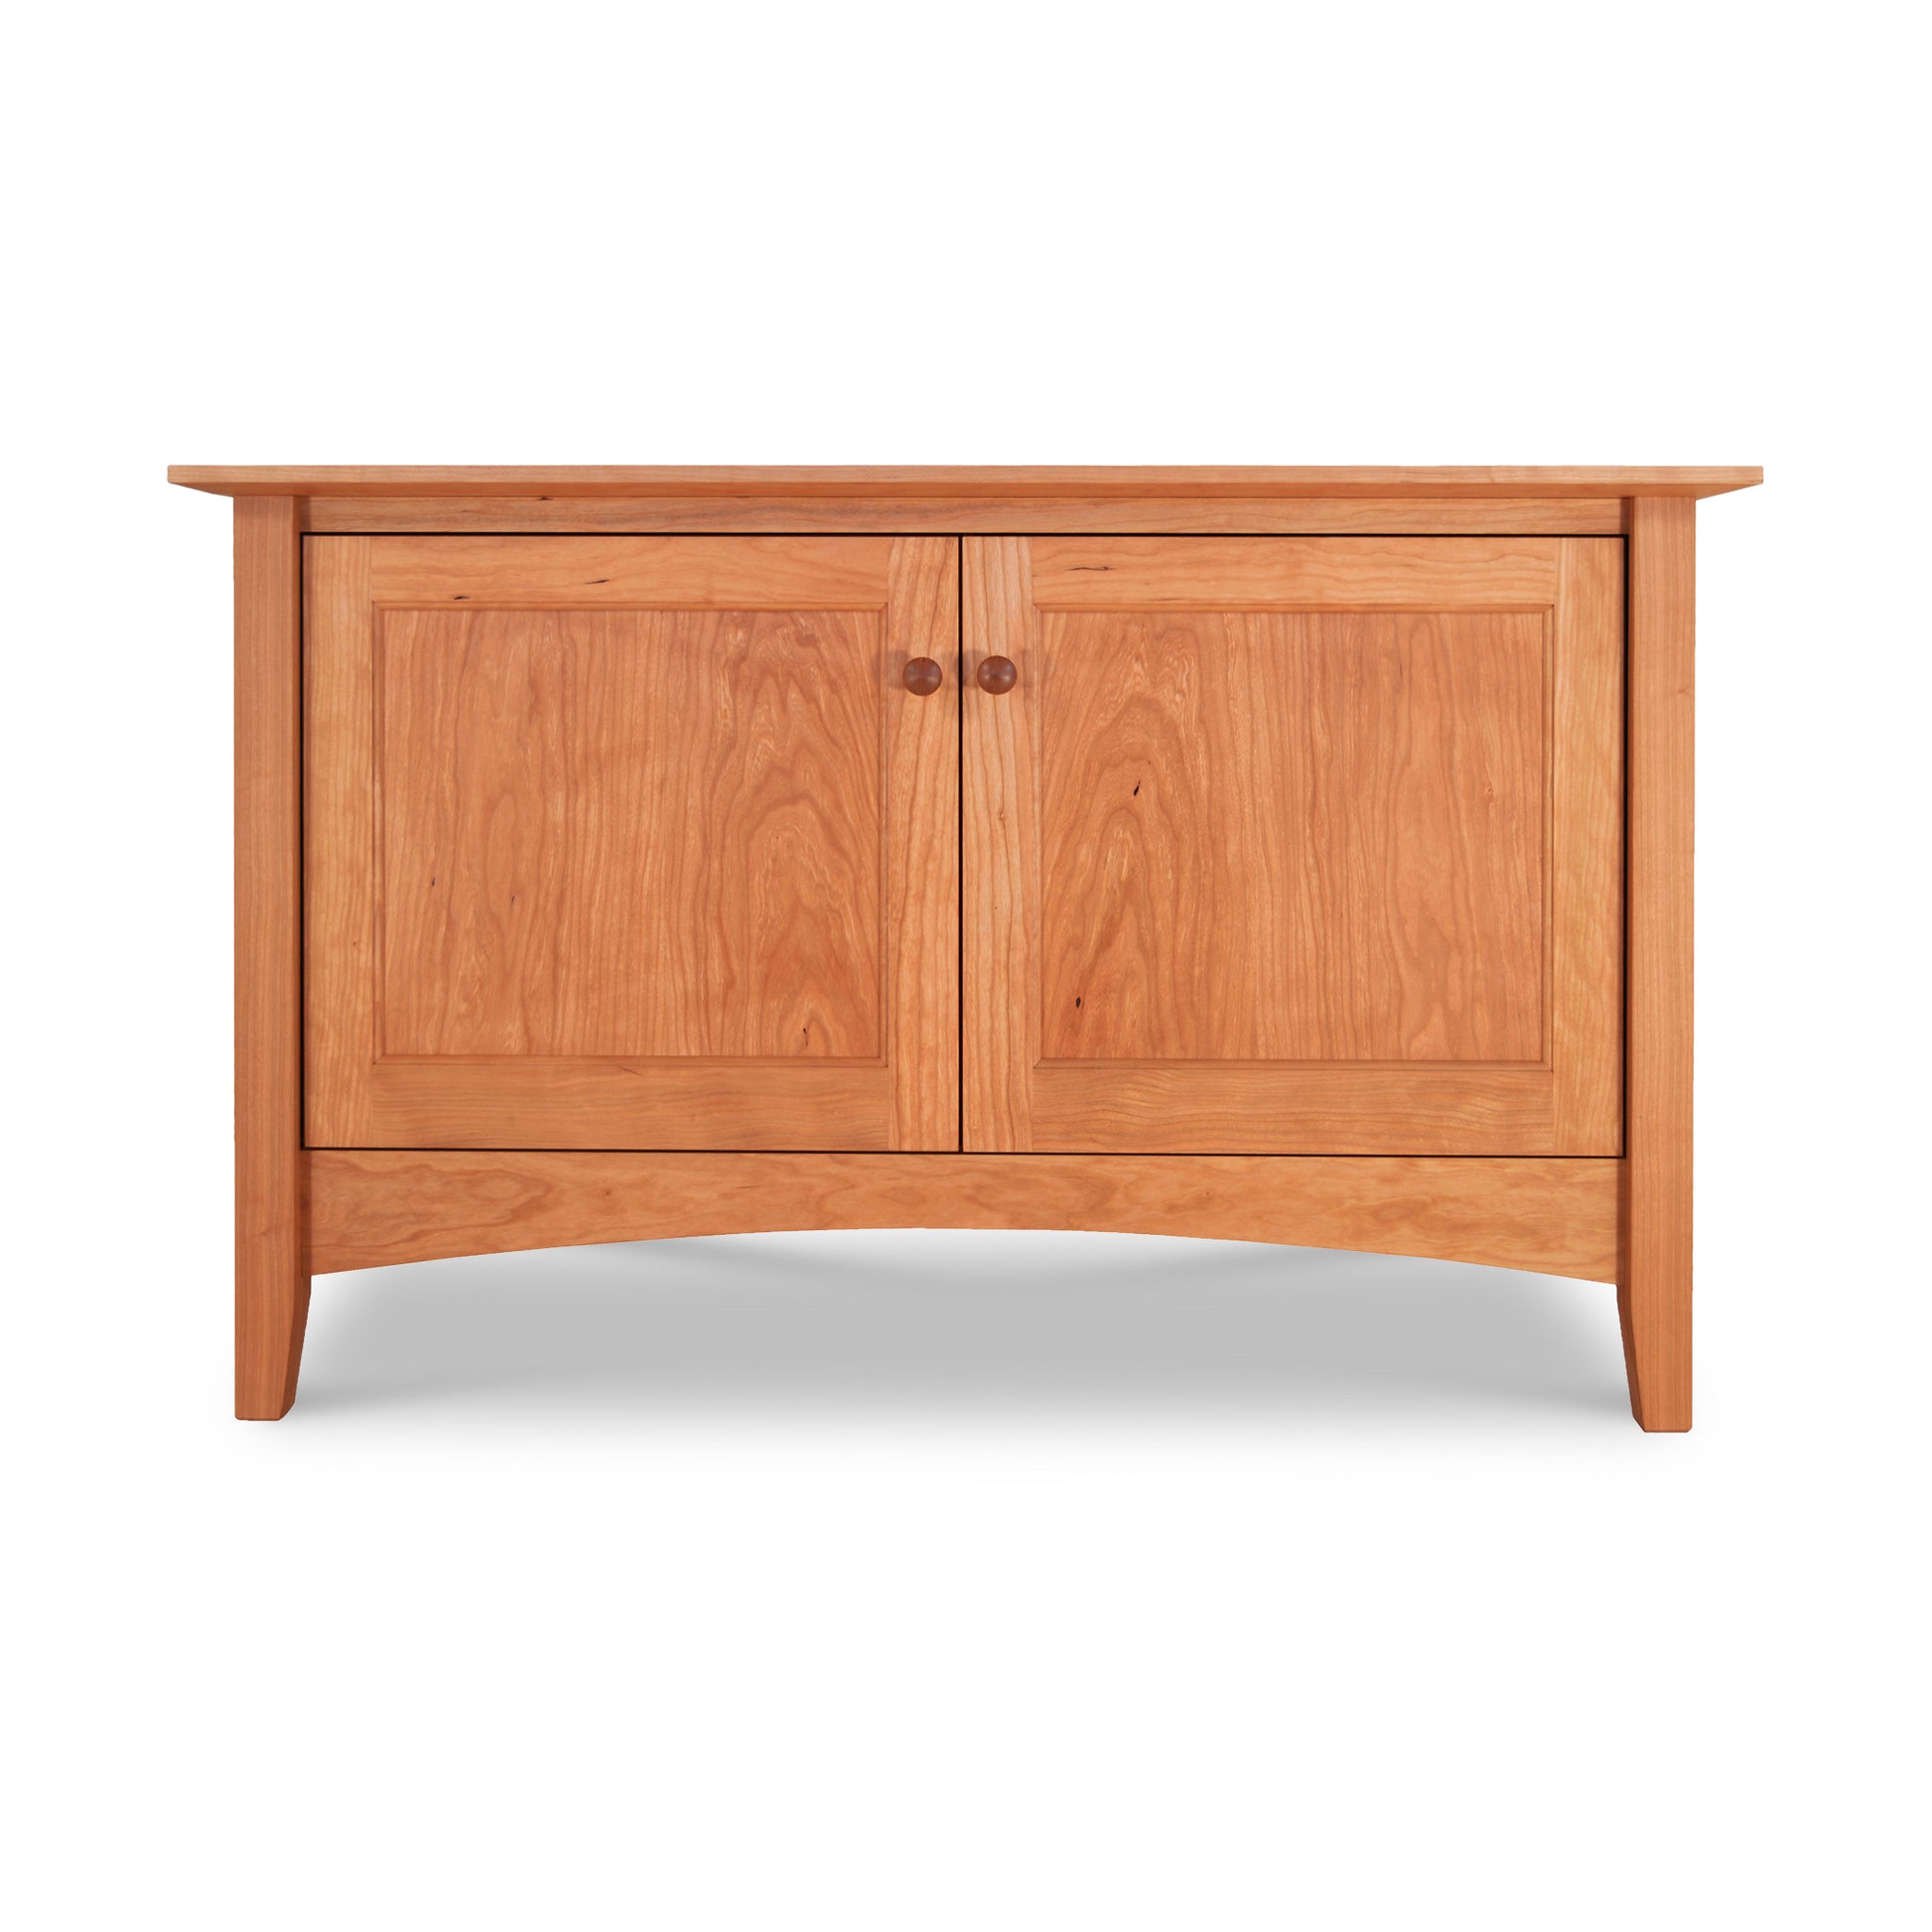 A small Maple Corner Woodworks American Shaker 48" TV Stand crafted with Vermont craftsmanship using solid hardwoods. This wooden cabinet features two doors and two drawers, combining both style and functionality.